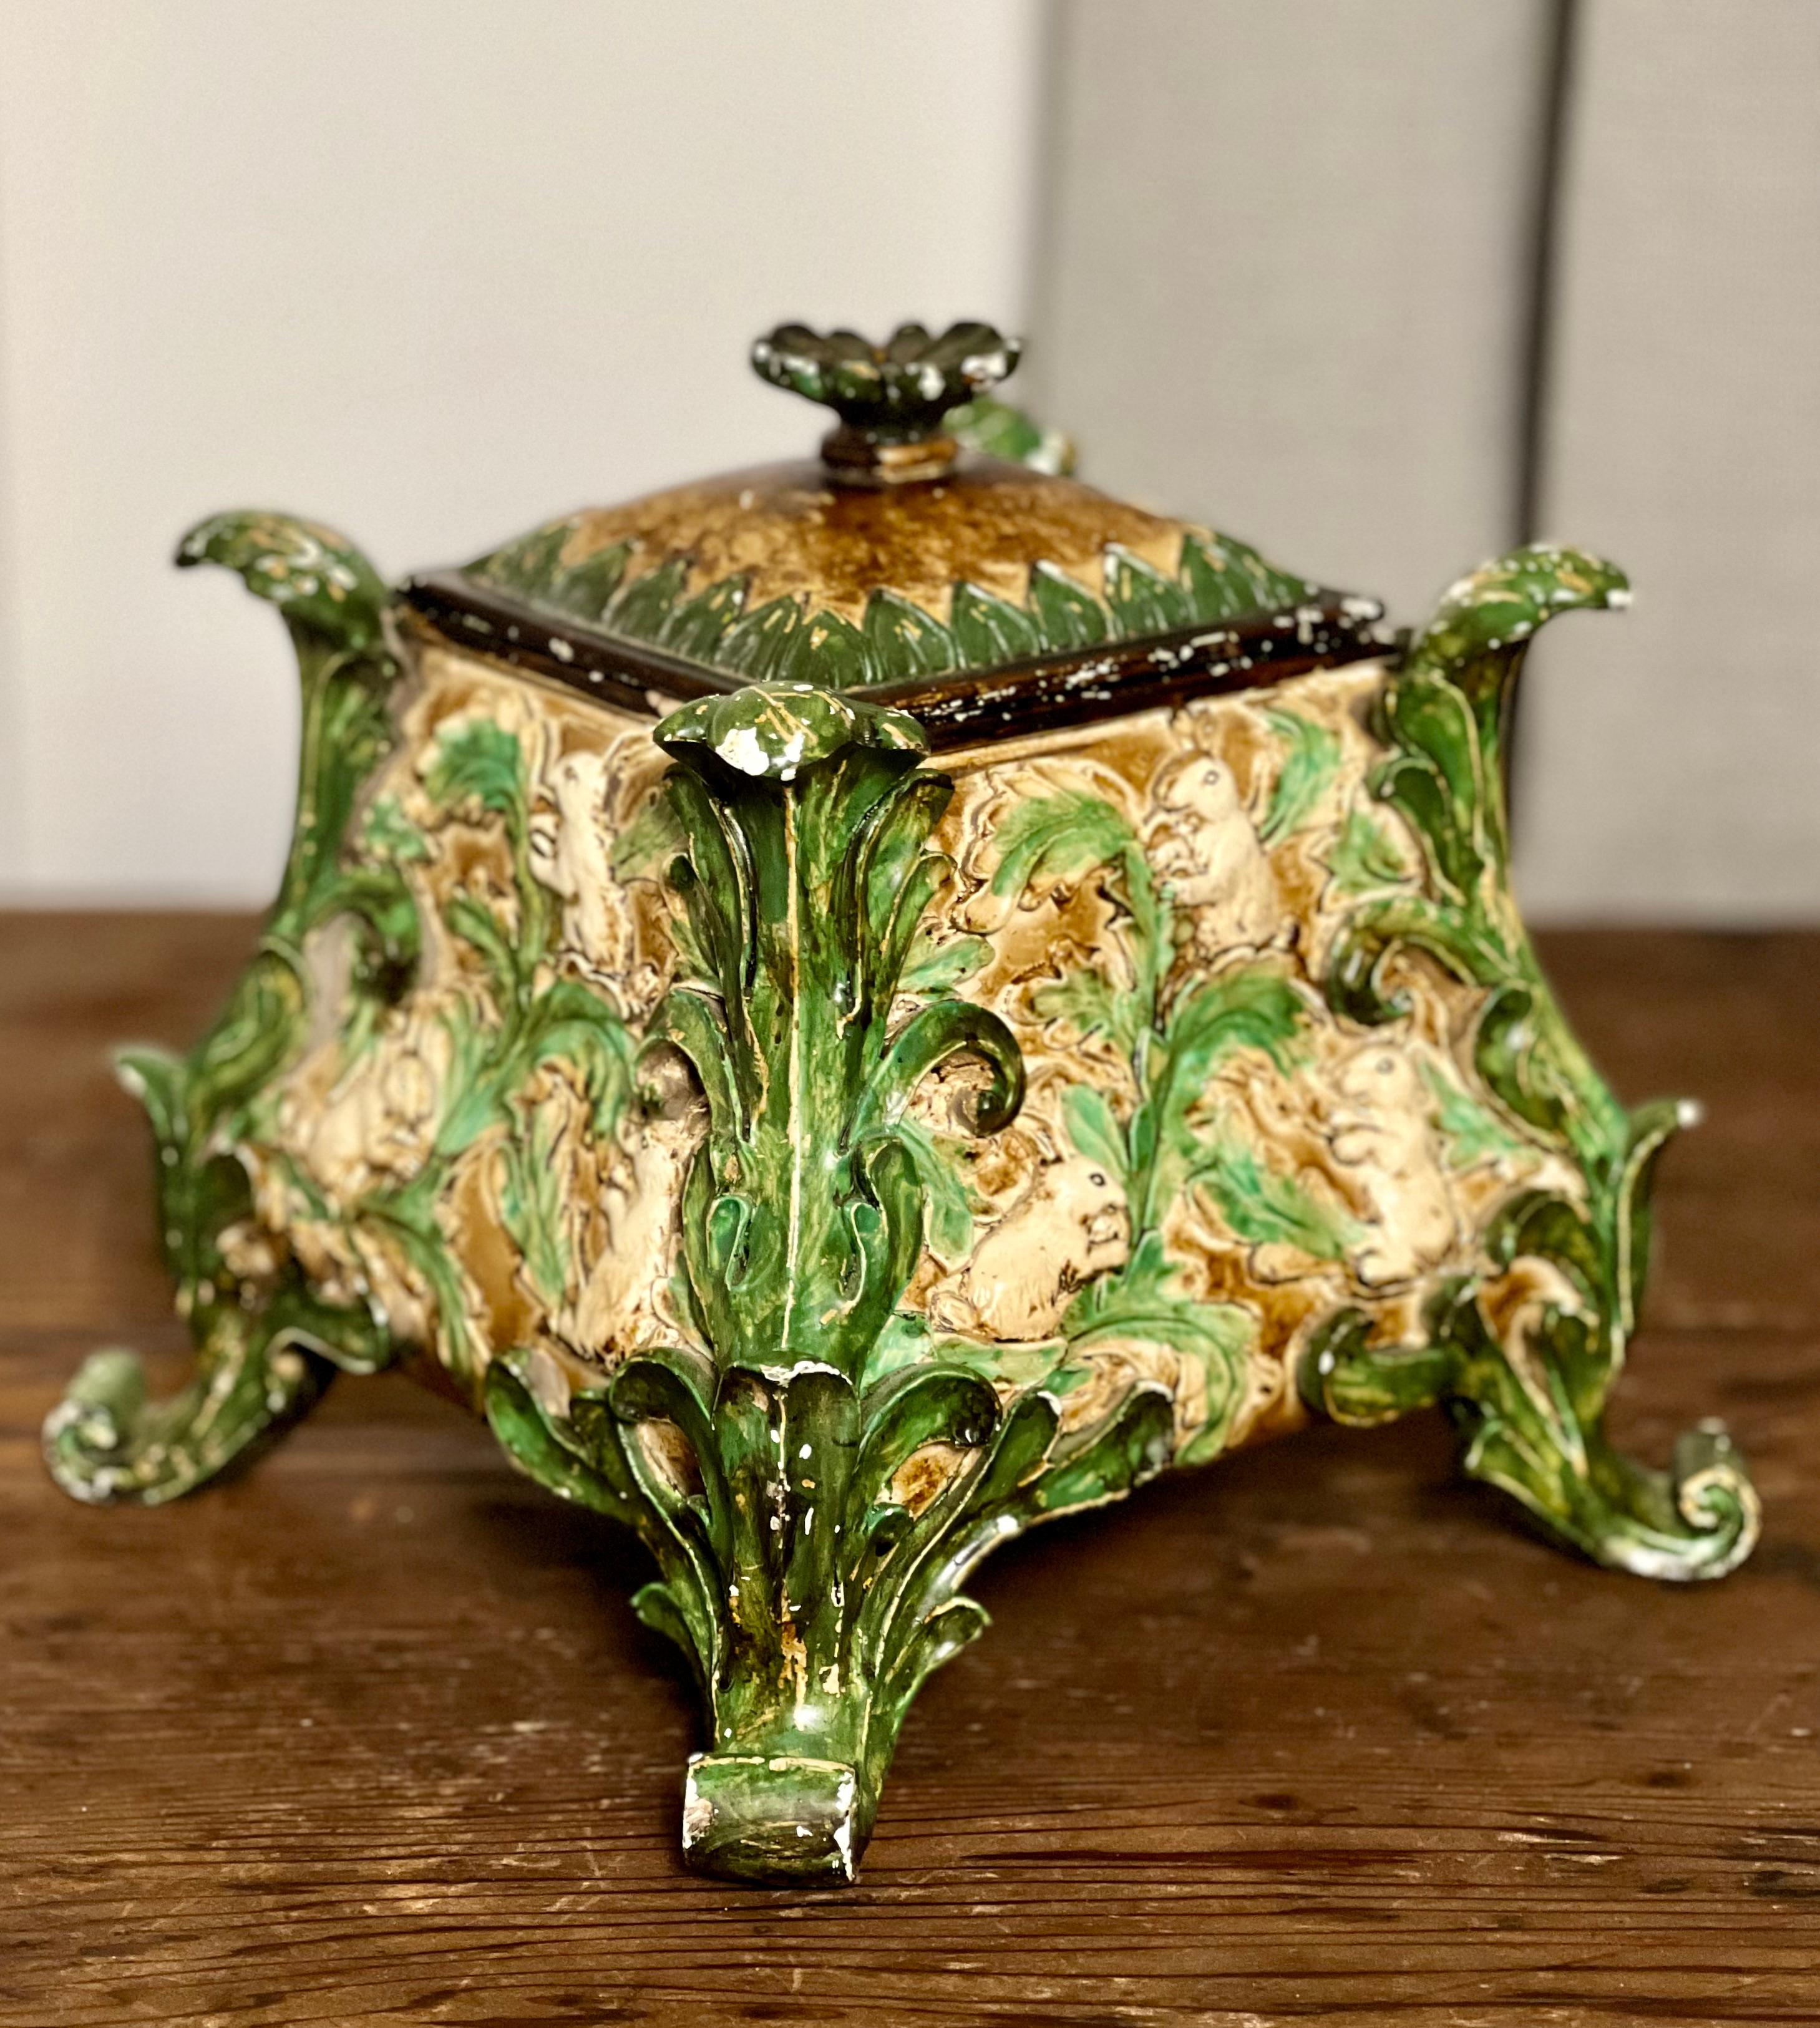 Vintage Rococo style large resin composite table box, c. mid 20th century.

Gorgeous paint decorated, lidded box with high relief detail of charming rabbits and fluid leaf foliage. Inspired by 18th century designs, the box is crafted of a high